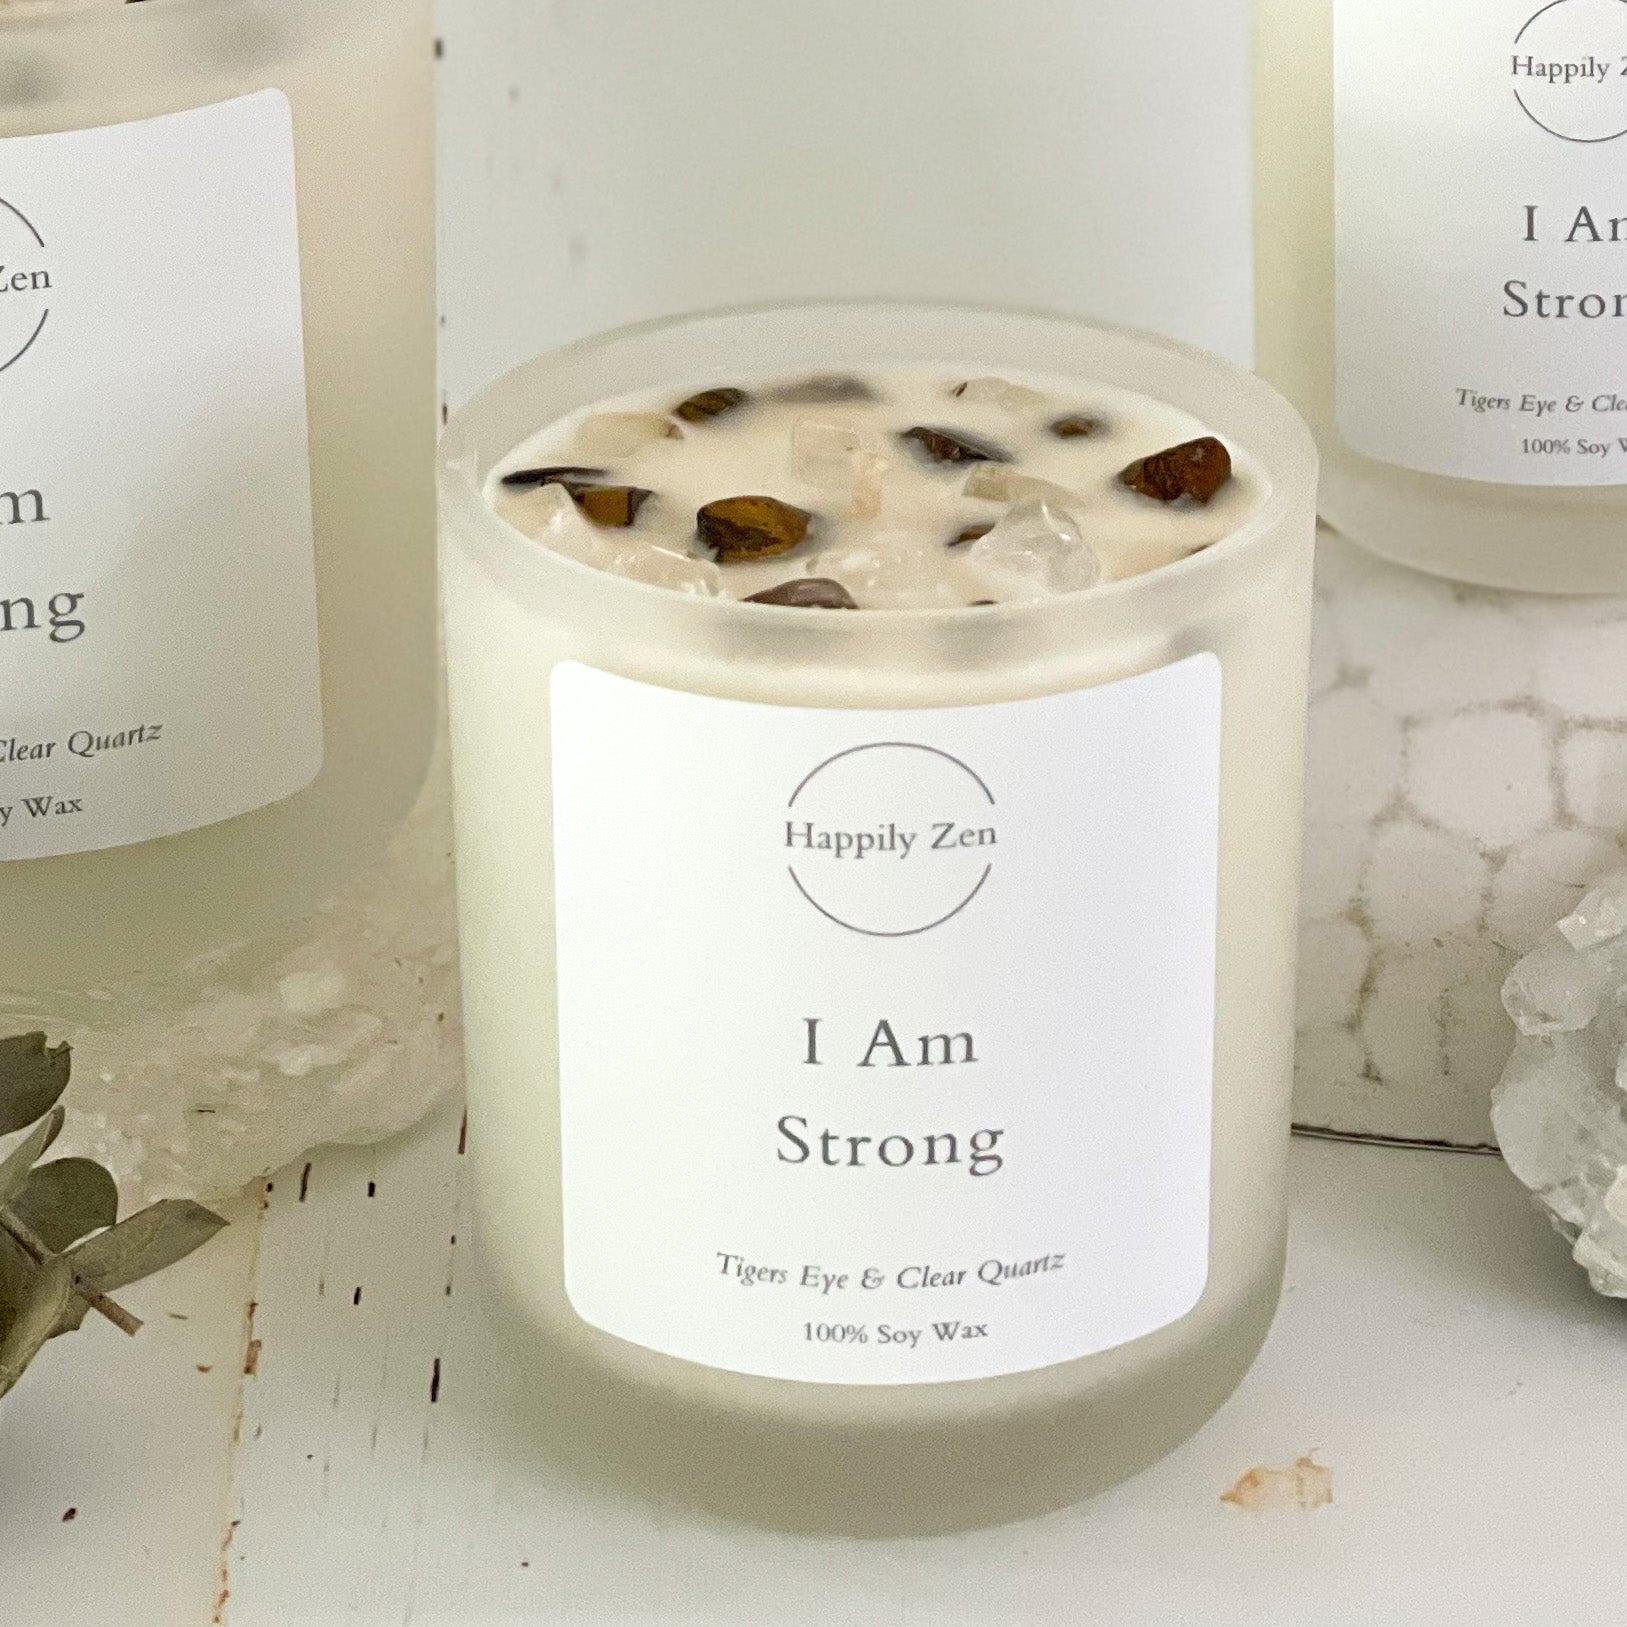 I Am Strong - Fresh Watermelon Candle-Happily Zen